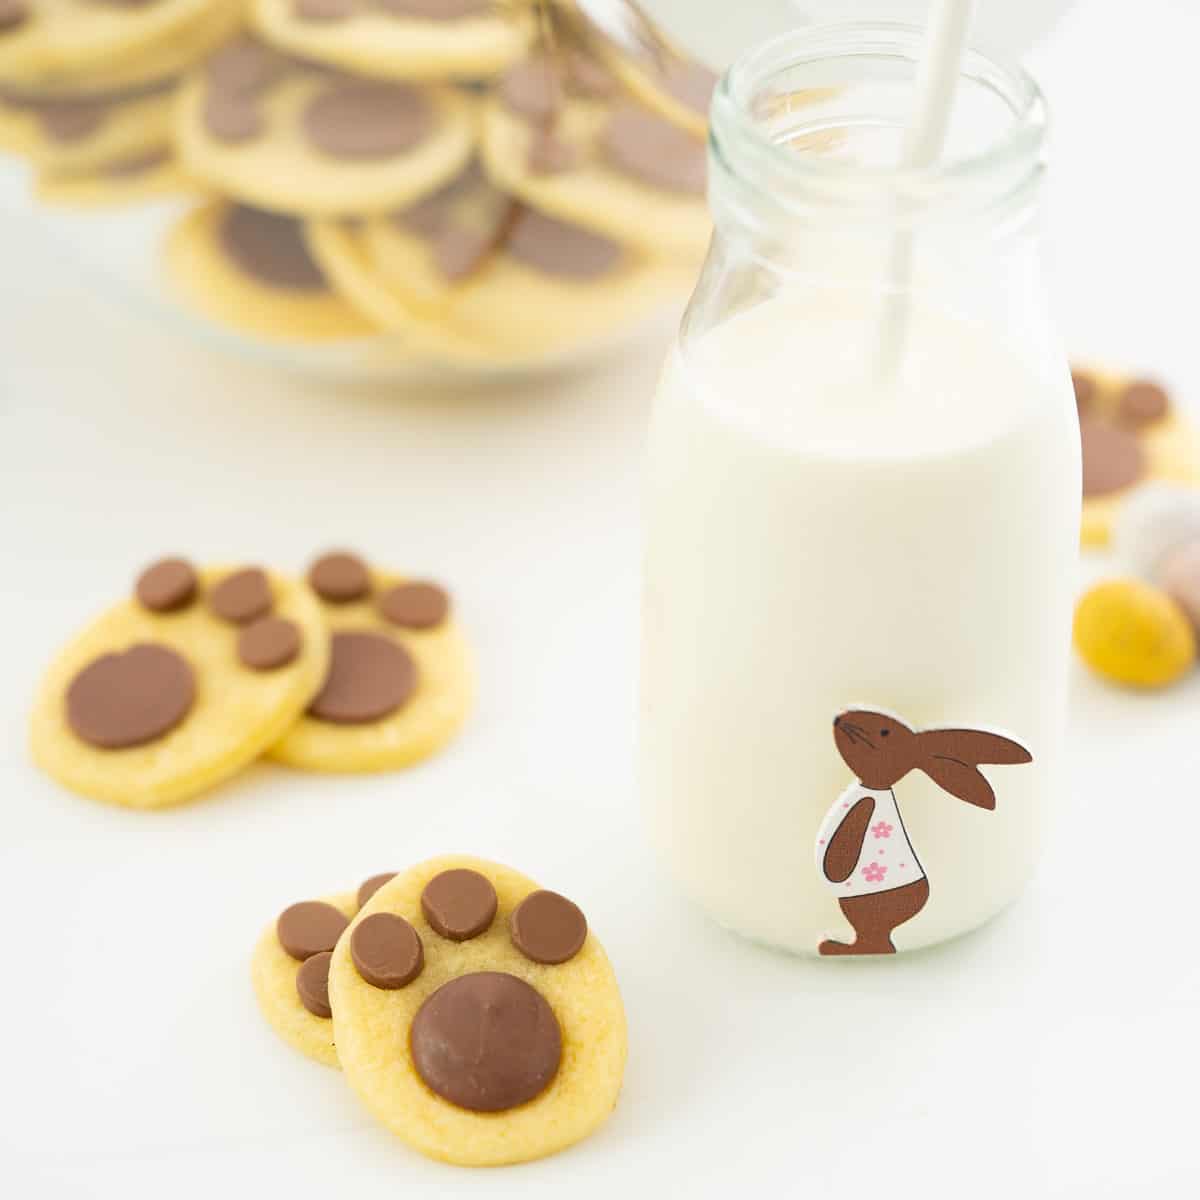 Bunny footprint cookies on a white bench top next to a small glass bottle of milk decorated with a picture of the easter bunny.